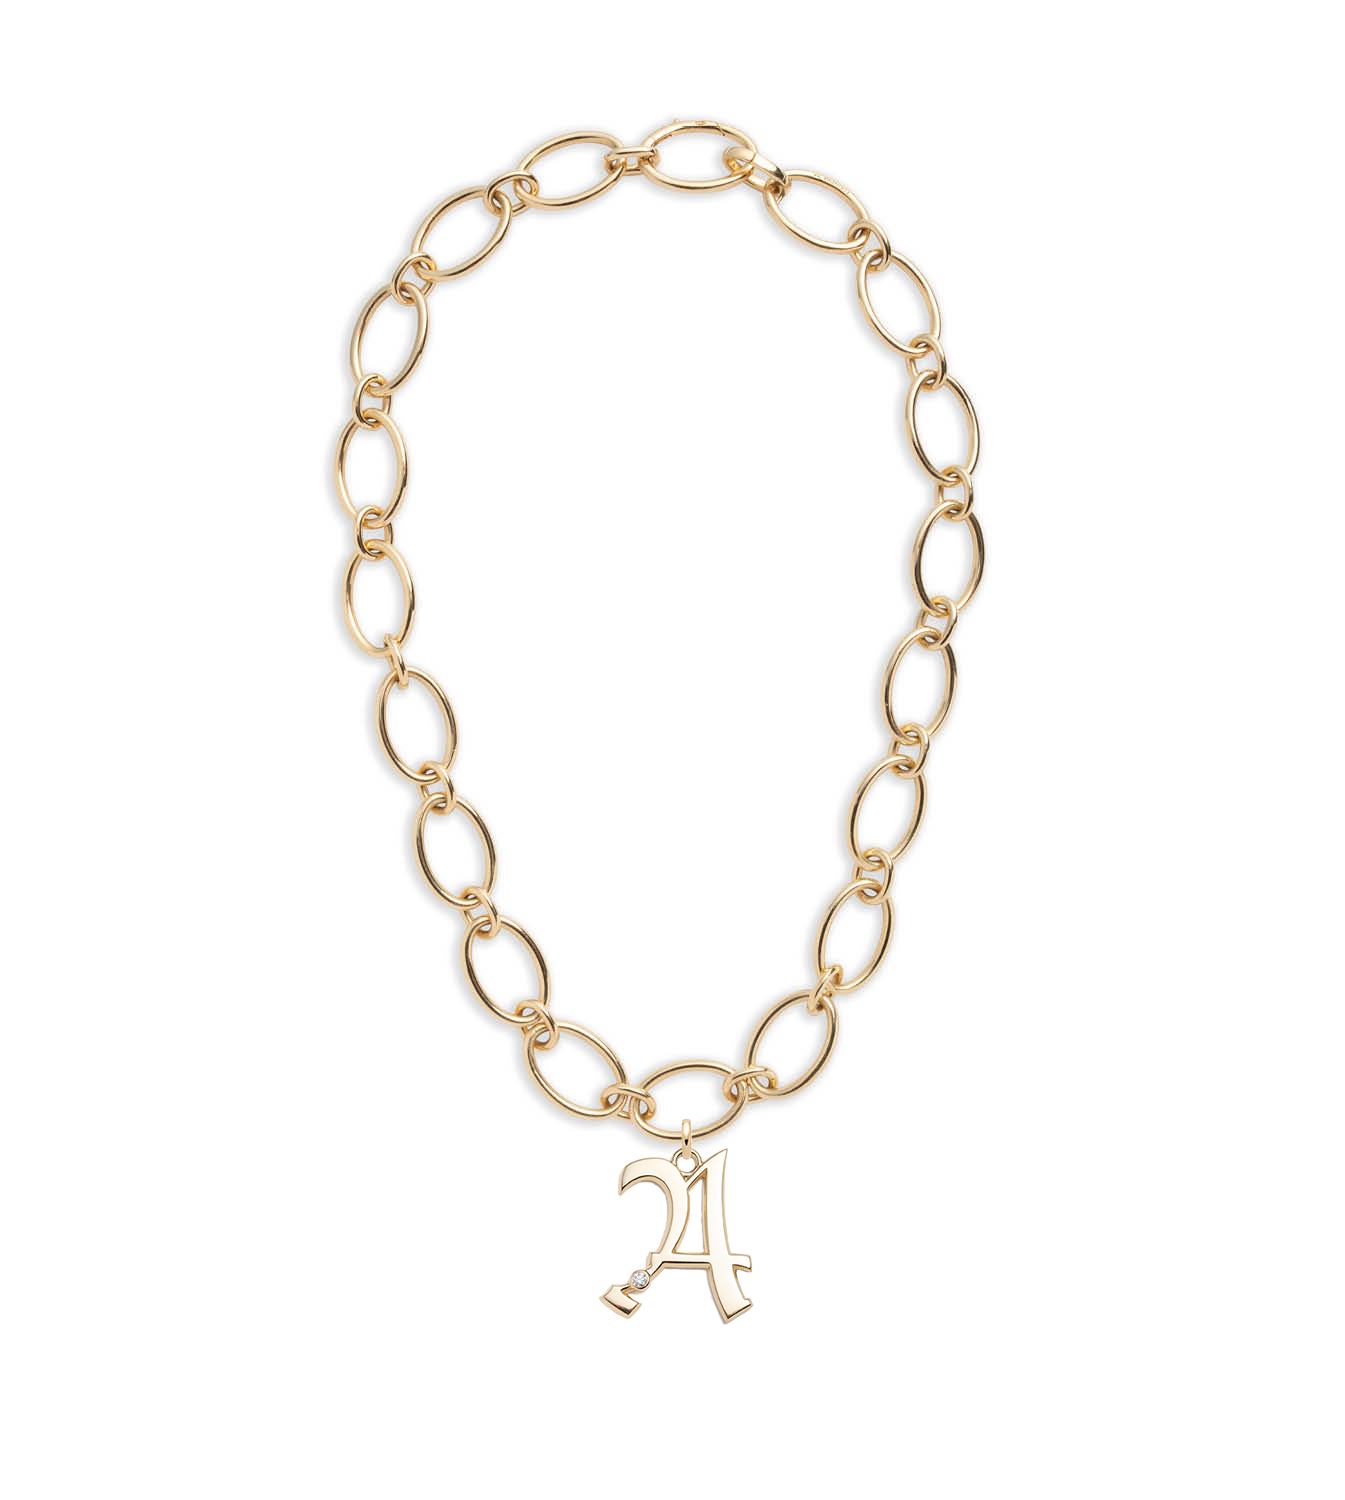 Oversized Initial : Oval Link Chain Necklace